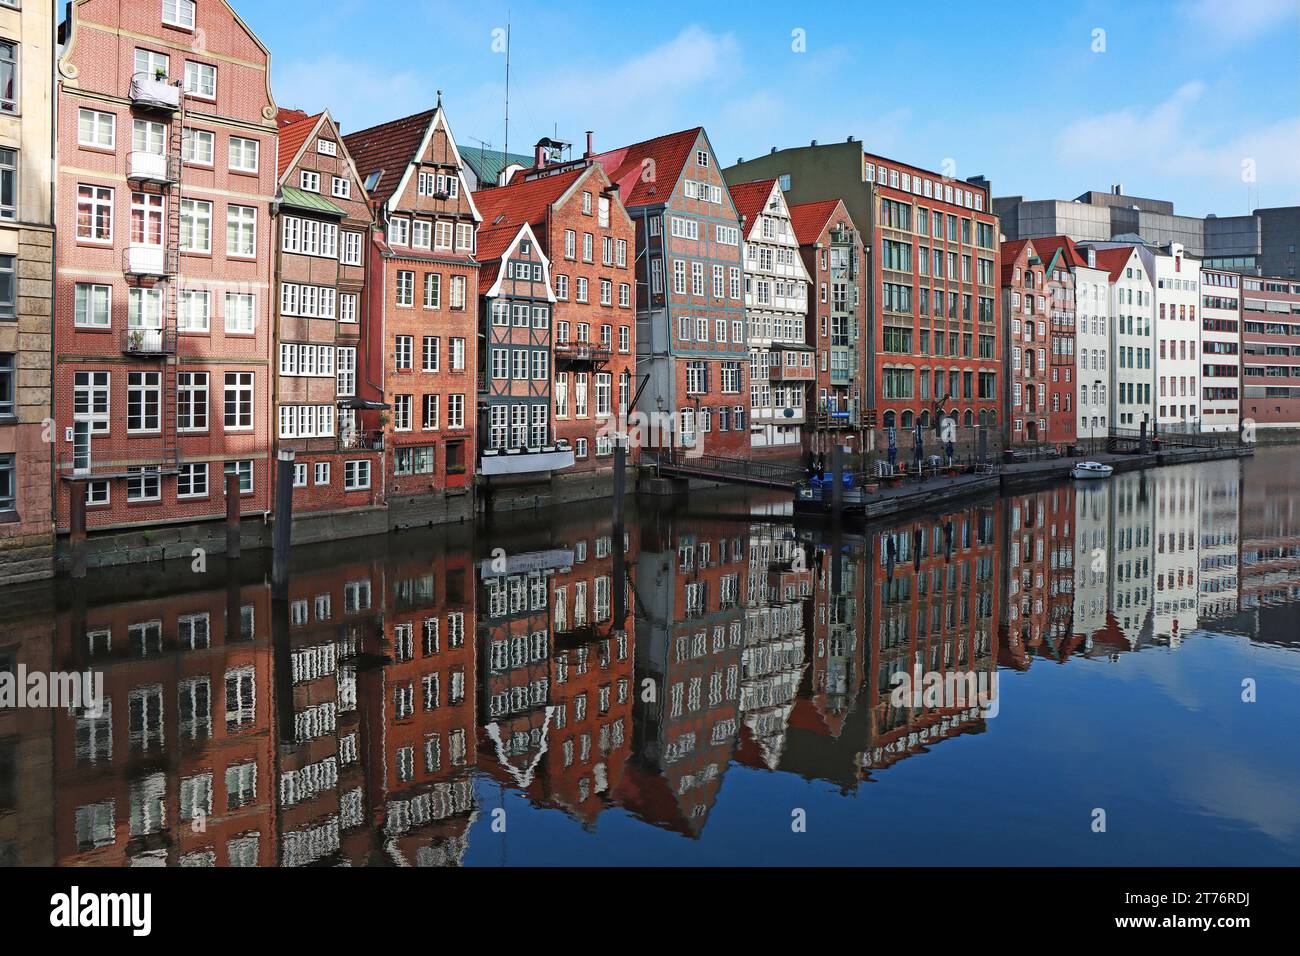 View of buildings along a canal in Hamburg, Germany Stock Photo